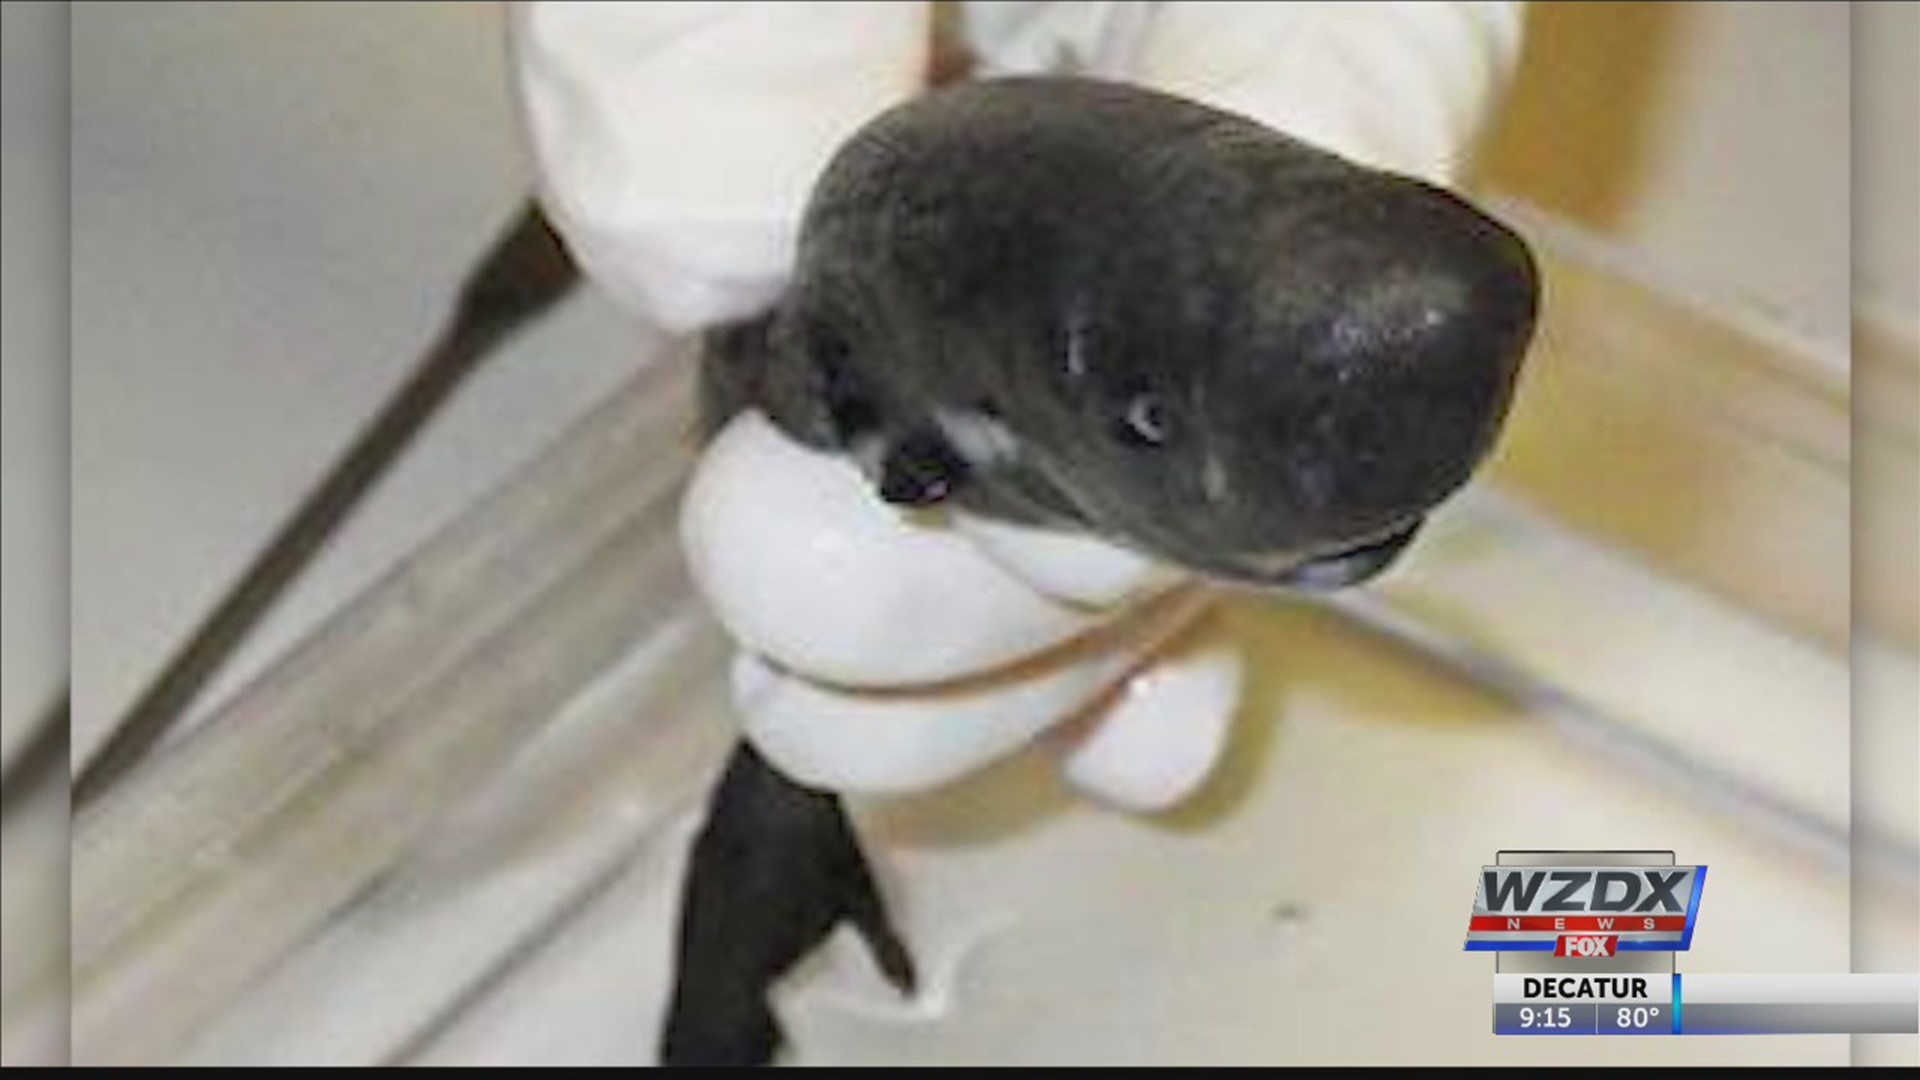 A new species of shark has been discovered and it emits light.